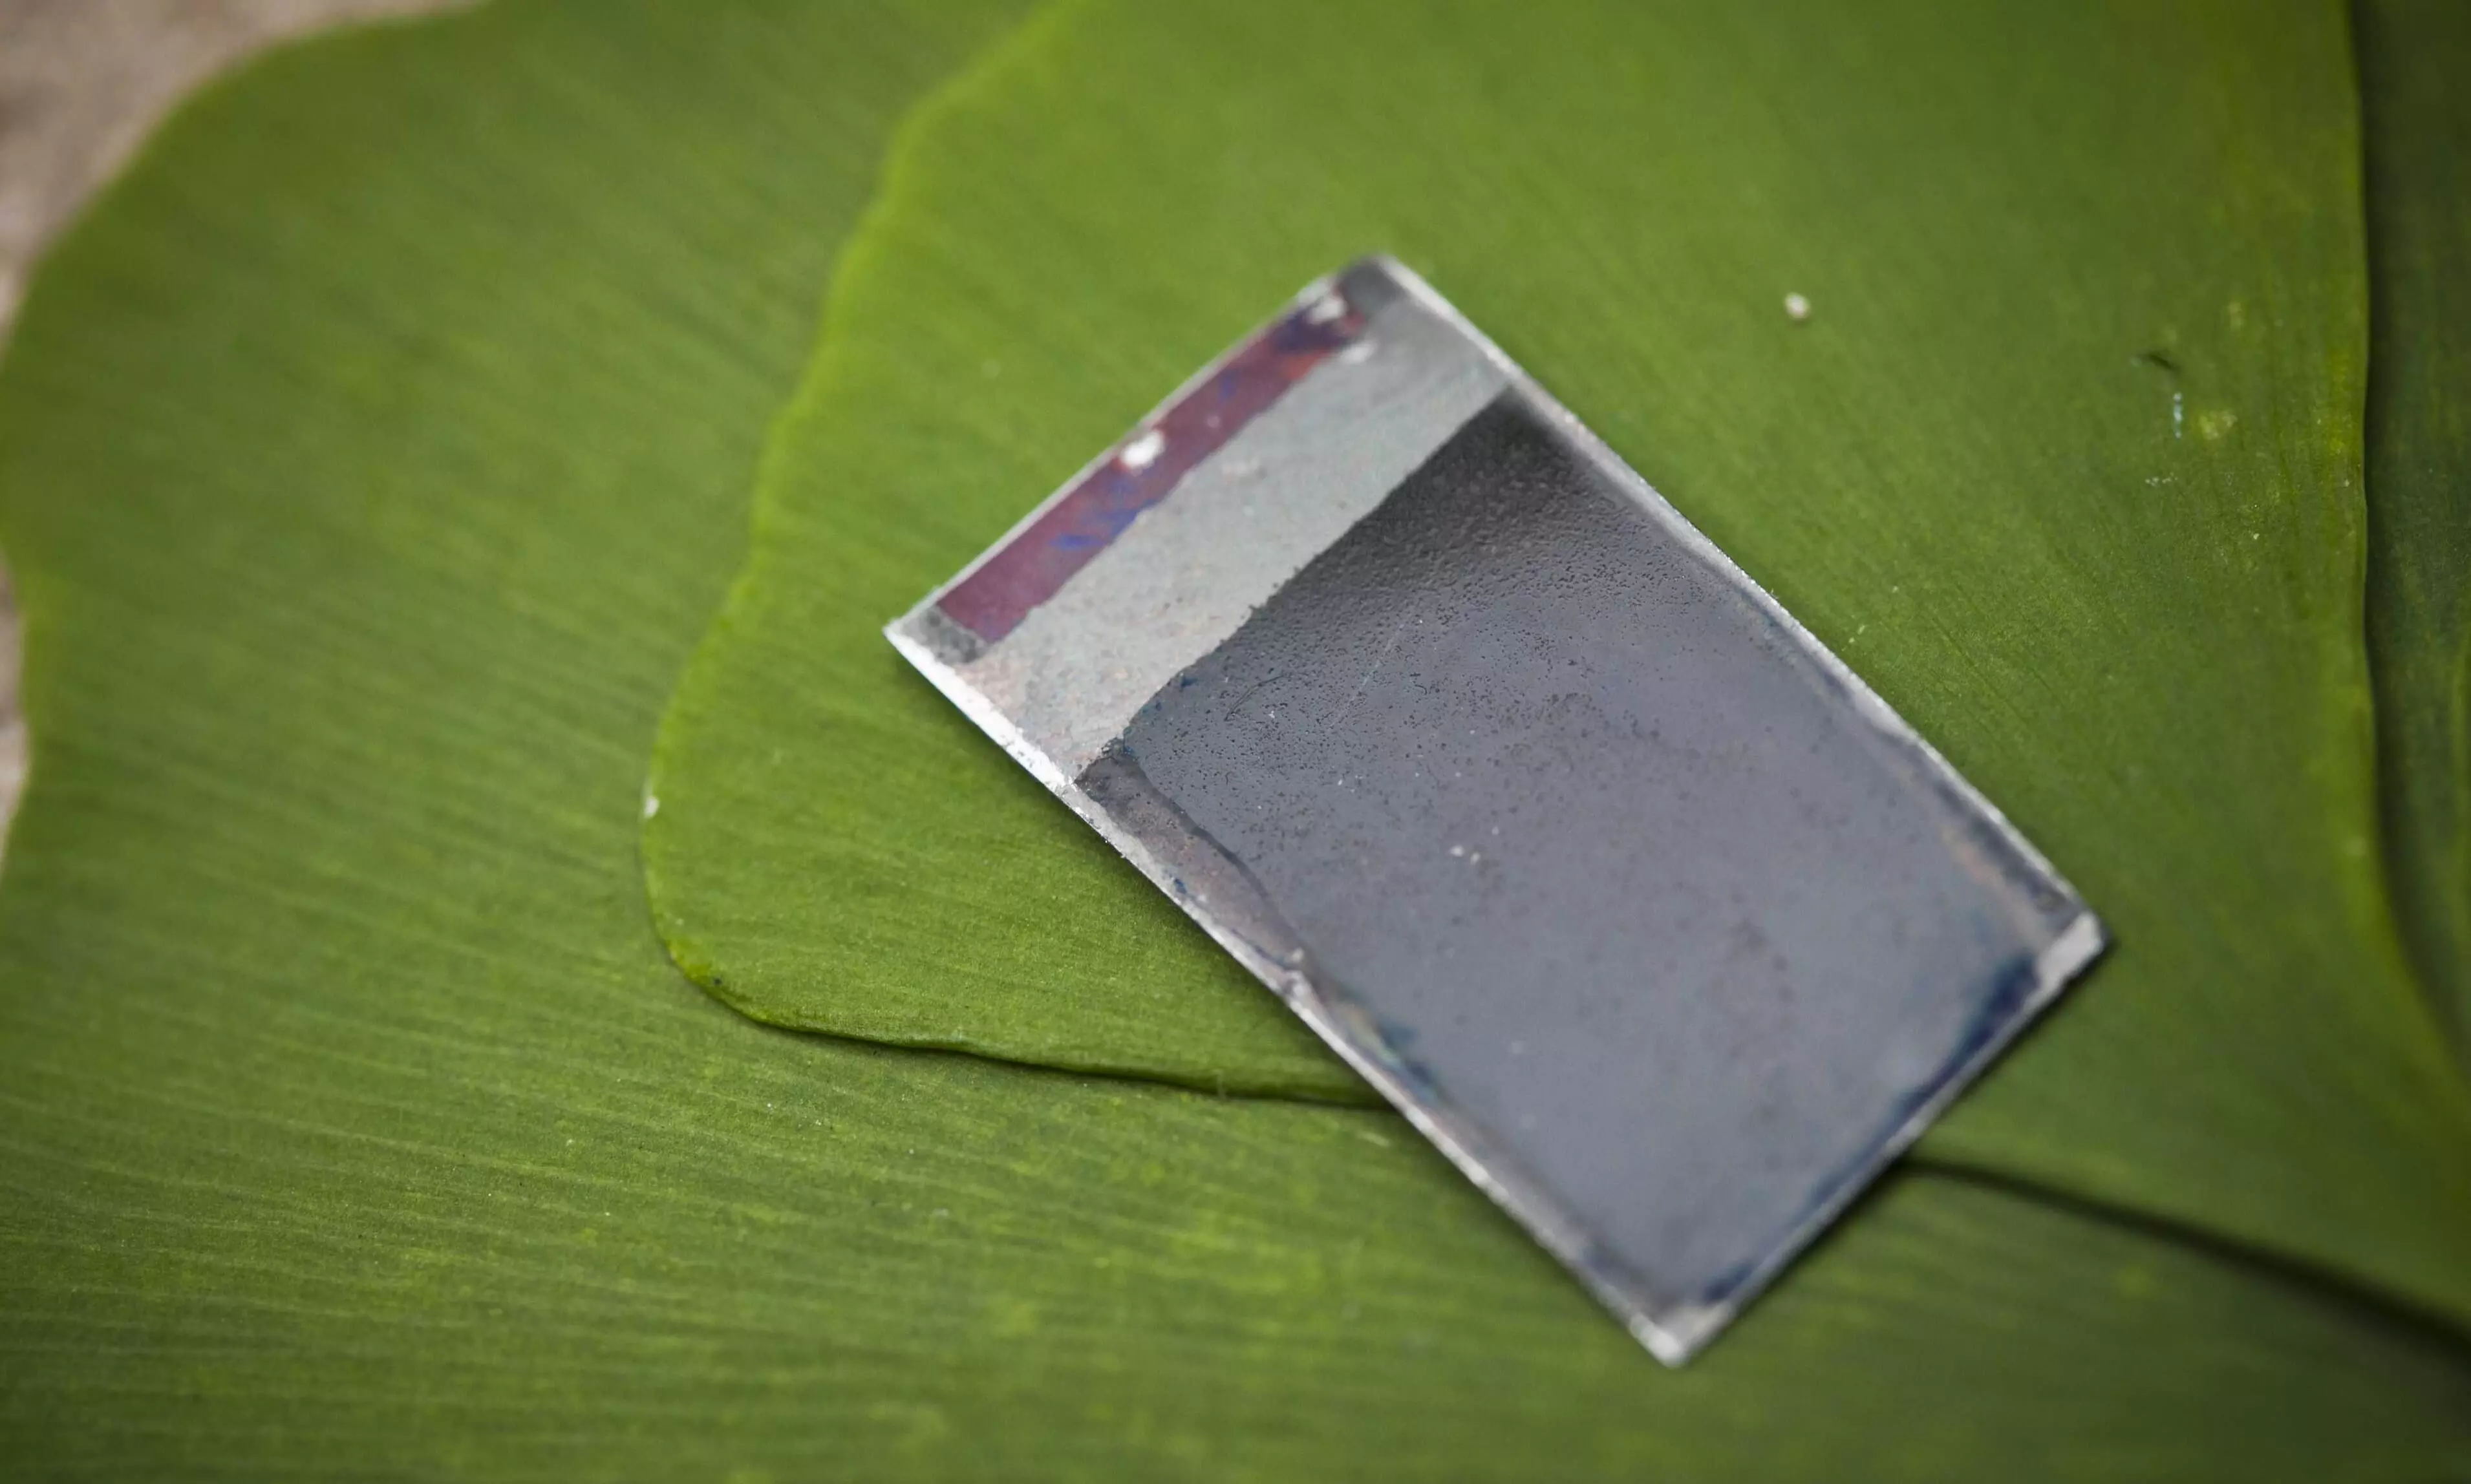 Ground-breaking technology: Artificial leaf turns sunlight into drop-in fuels